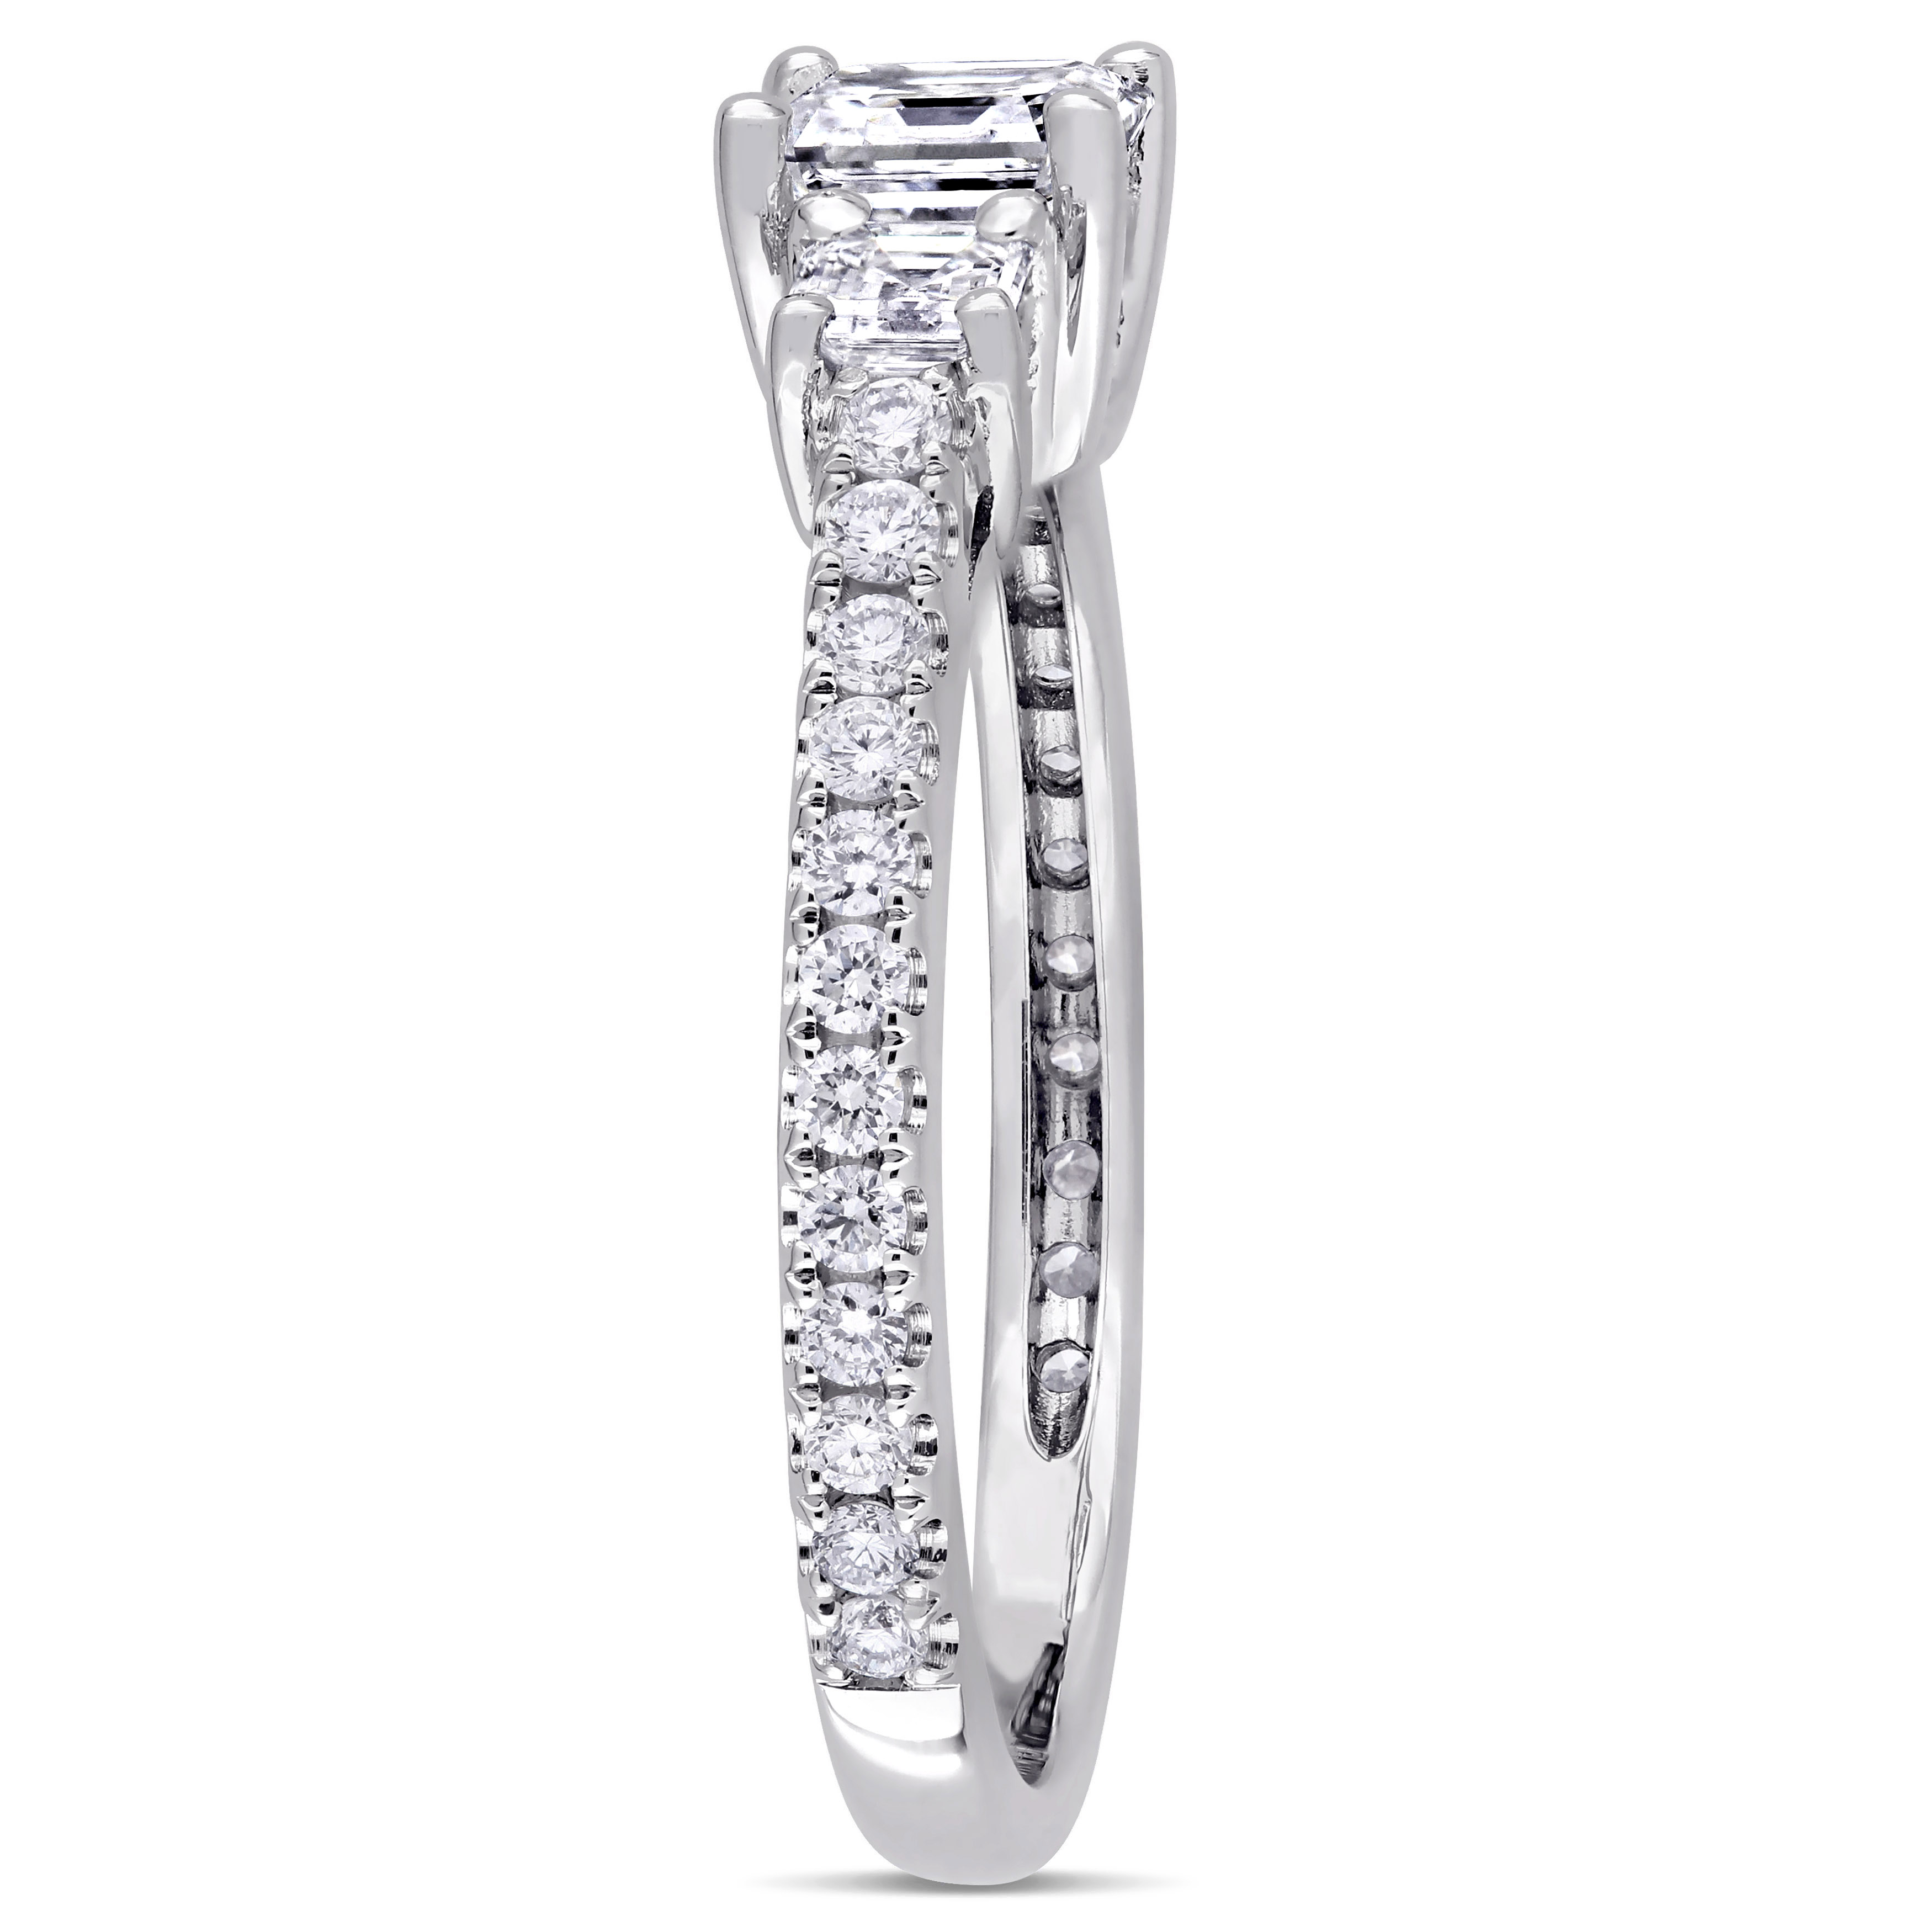 1 1/8 CT TW Diamond 3-Stone Engagement Ring in 14k White Gold